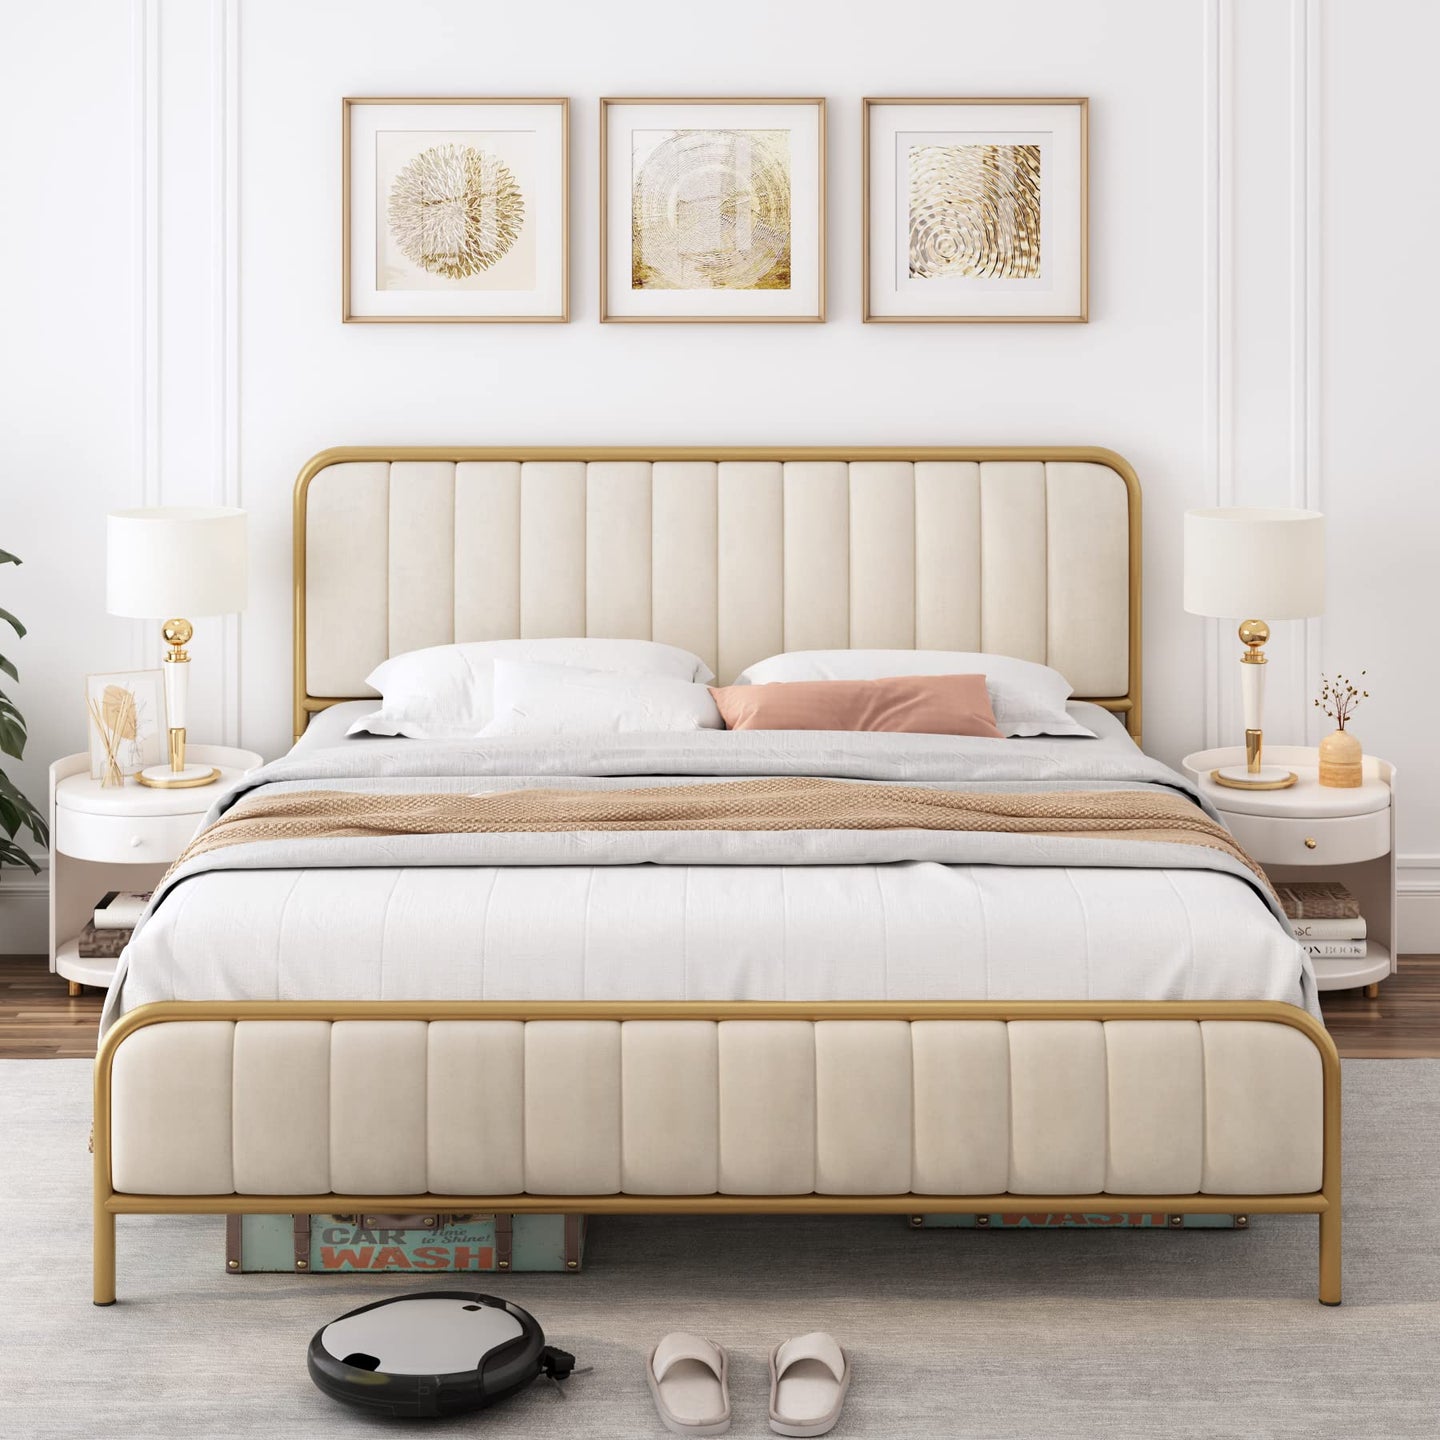 HITHOS Queen Size Bed Frame with Button Tufted Headboard, Upholstered Heavy Duty Metal Mattress Foundation with Wooden Slats, Easy Assembly, No Box Spring Needed (Golden/Off White, Queen)